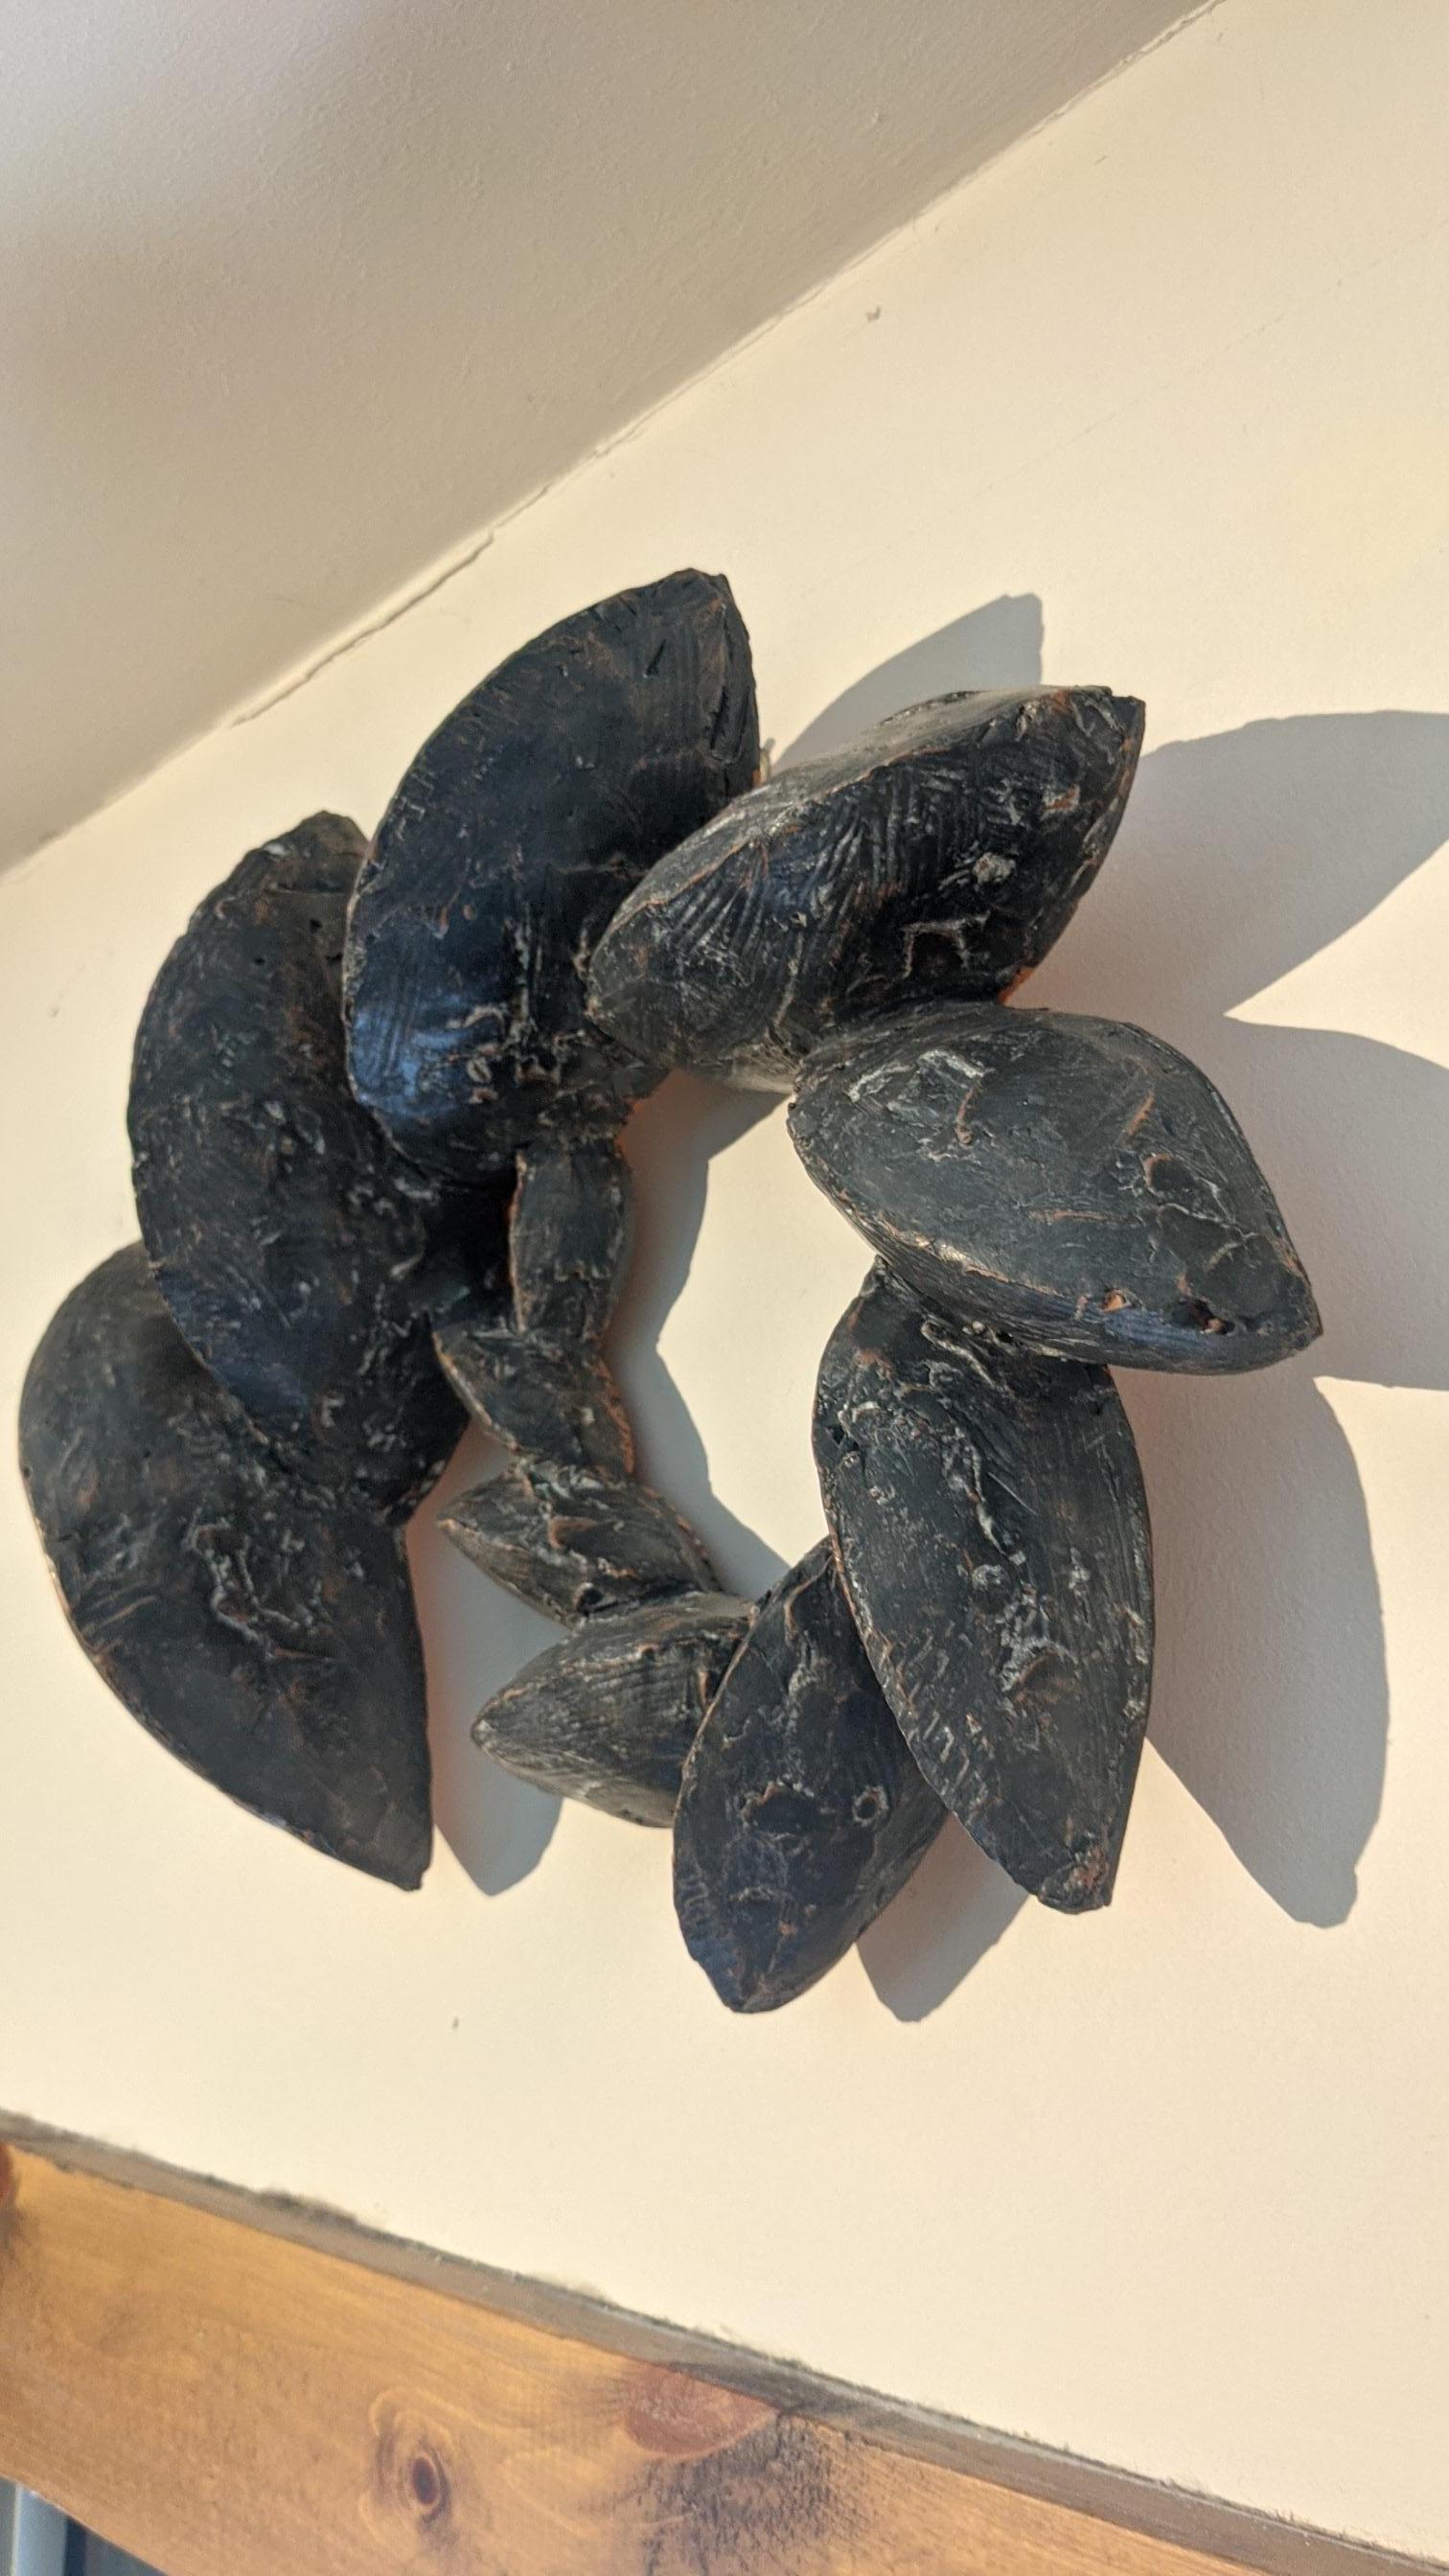 Black Frond, wall-hanging ceramic sculpture, 12 x 13 x 5 inches, $700

Francesc Burgos is a Spanish-born sculptor and ceramic artist. His master’s degrees in architectural design (University of Barcelona), philosophy (Berkeley) and fine art